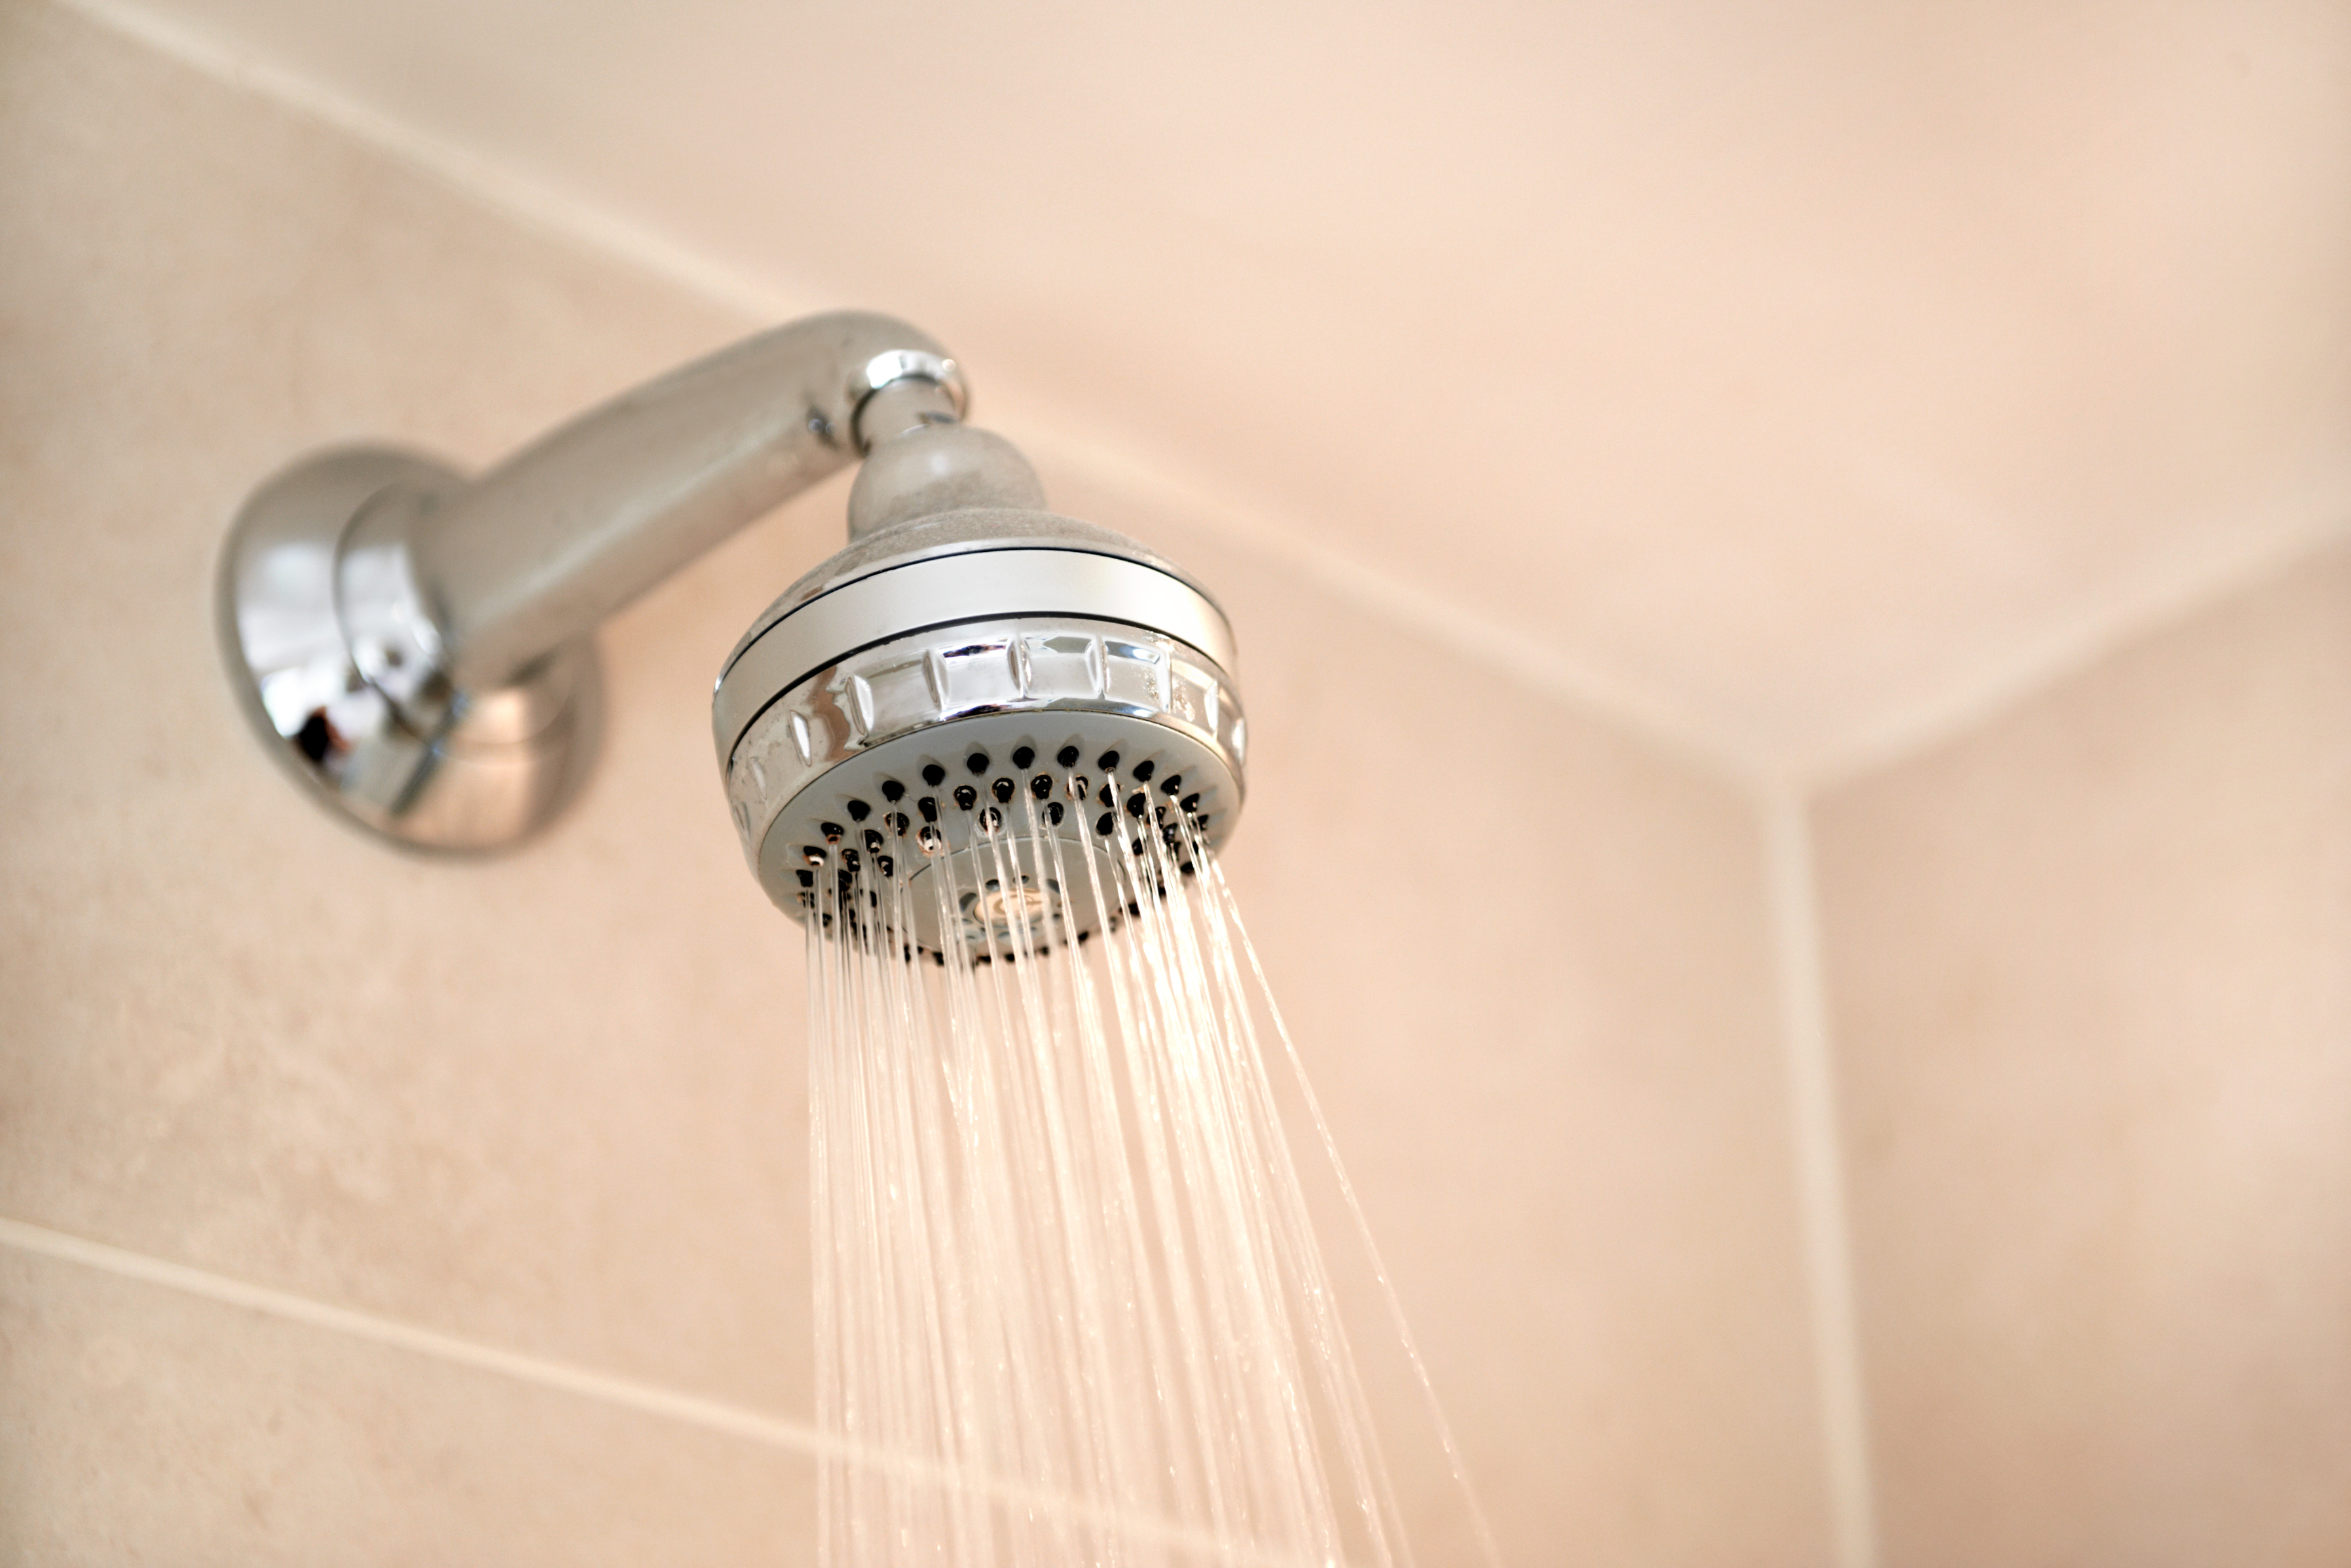 Water flowing from a showerhead in a bathroom